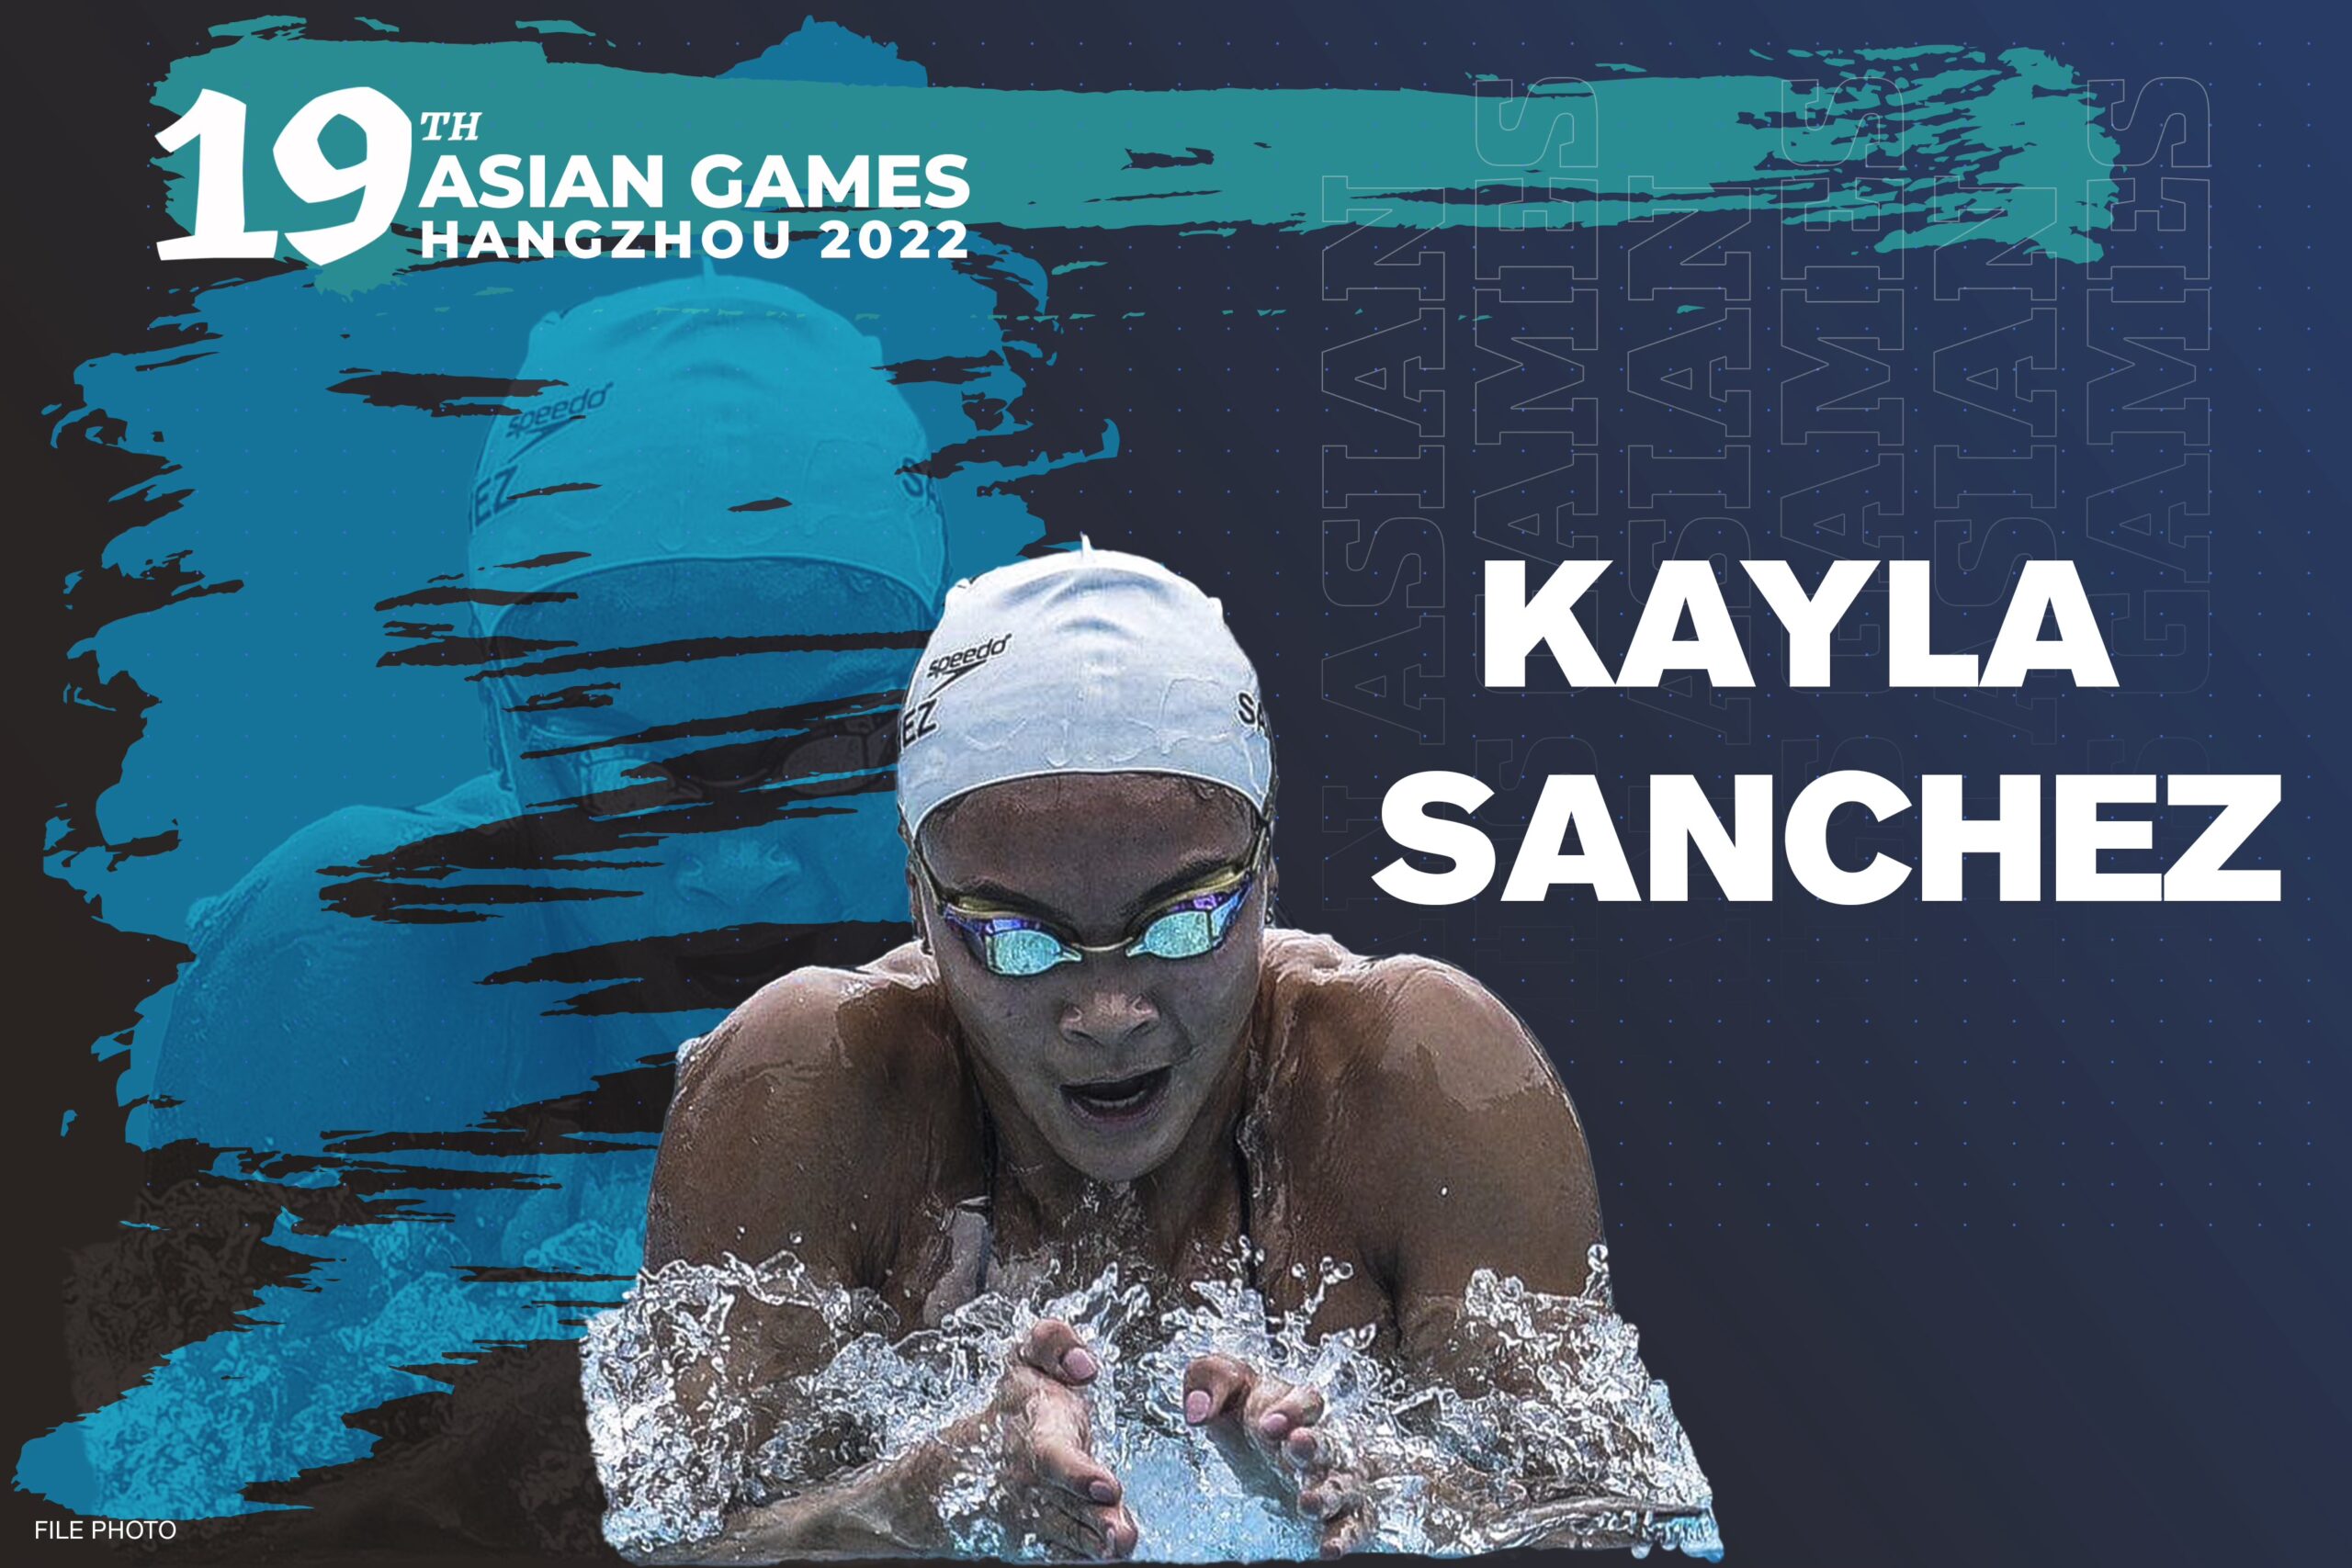 Philippine swimming's top bet in Asian Games: Kayla Sanchez.